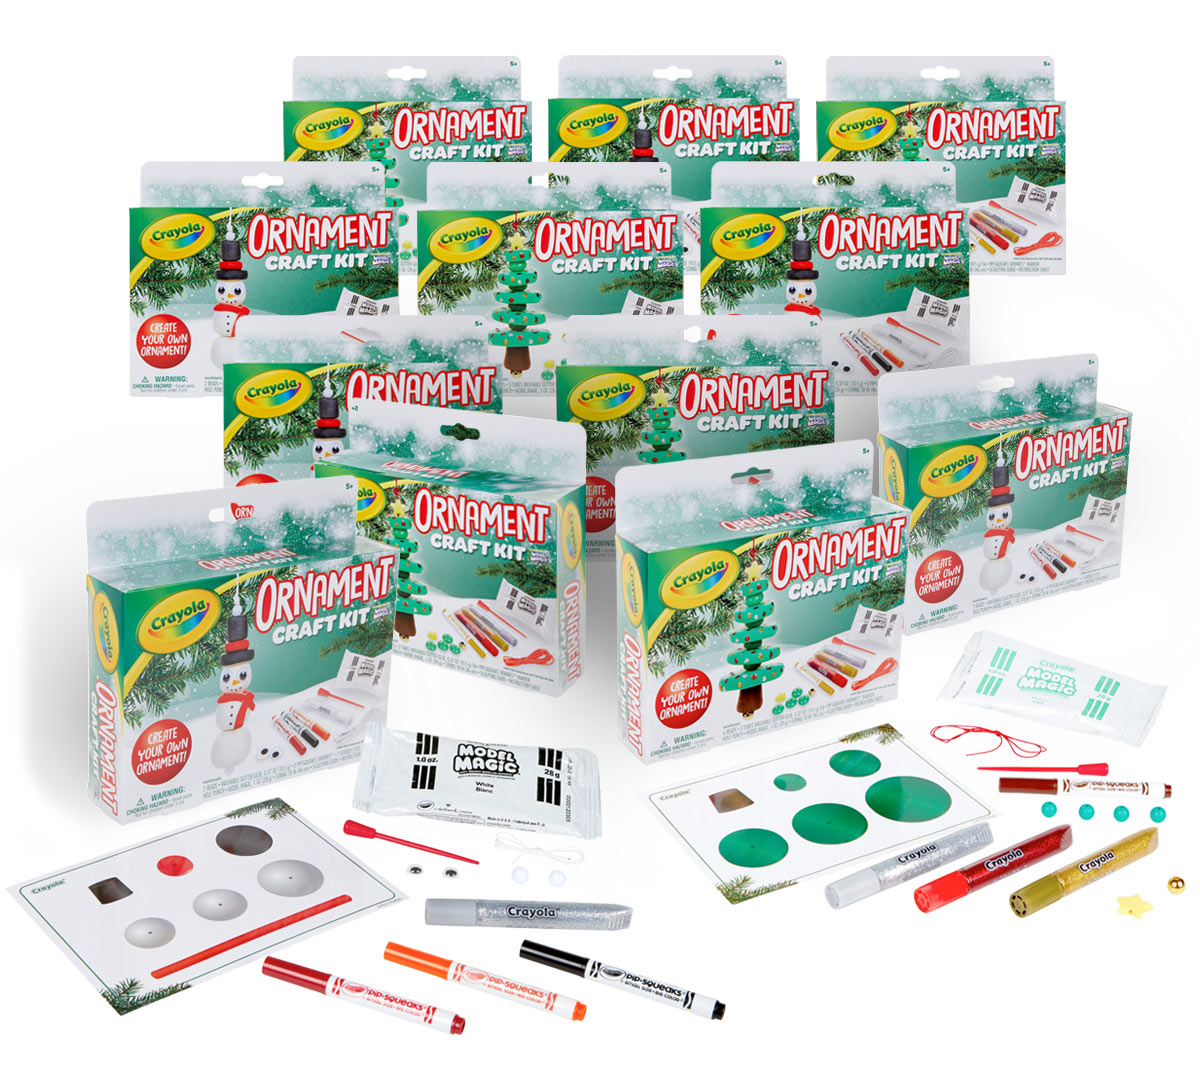 holiday craft kits for kids